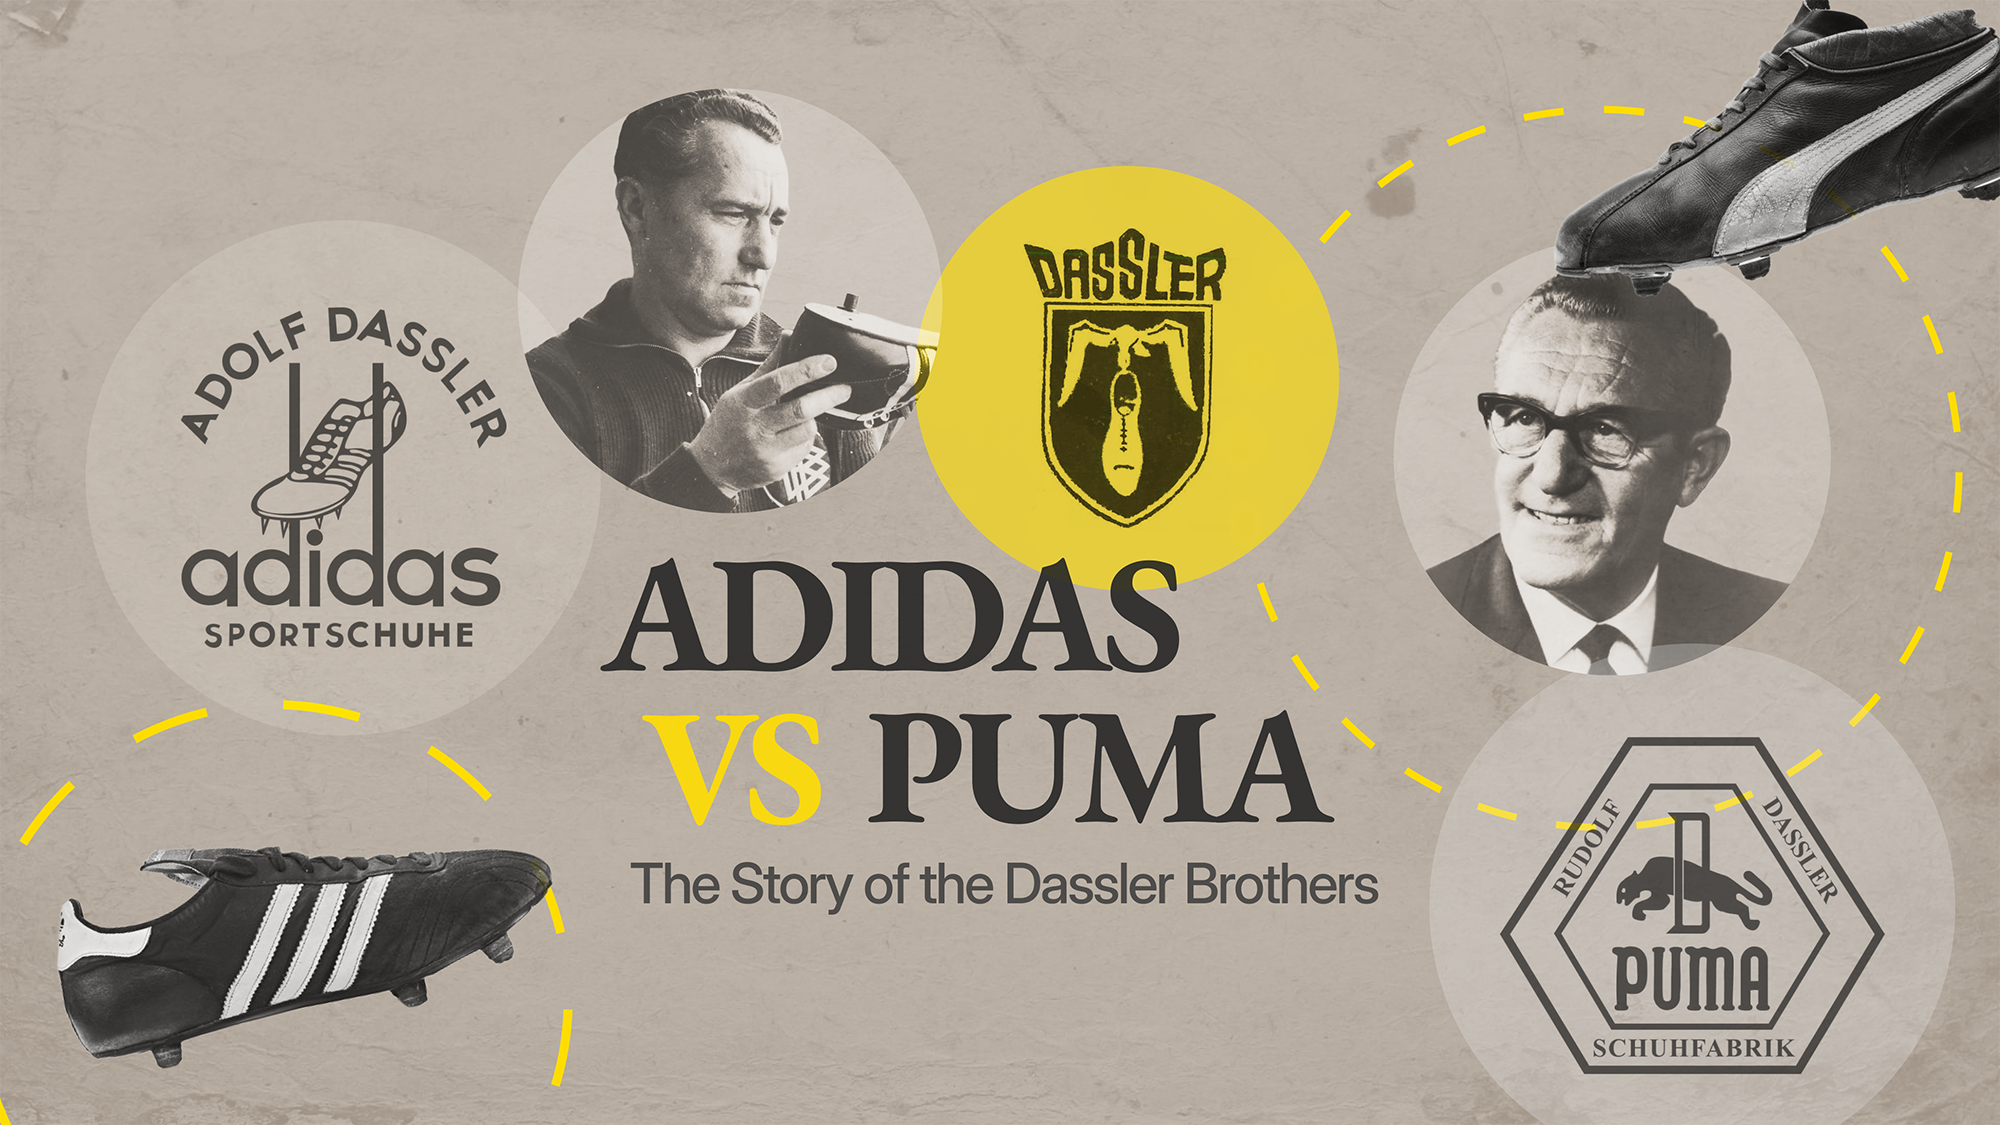 Adidas vs Puma: The story of the Dassler Brothers